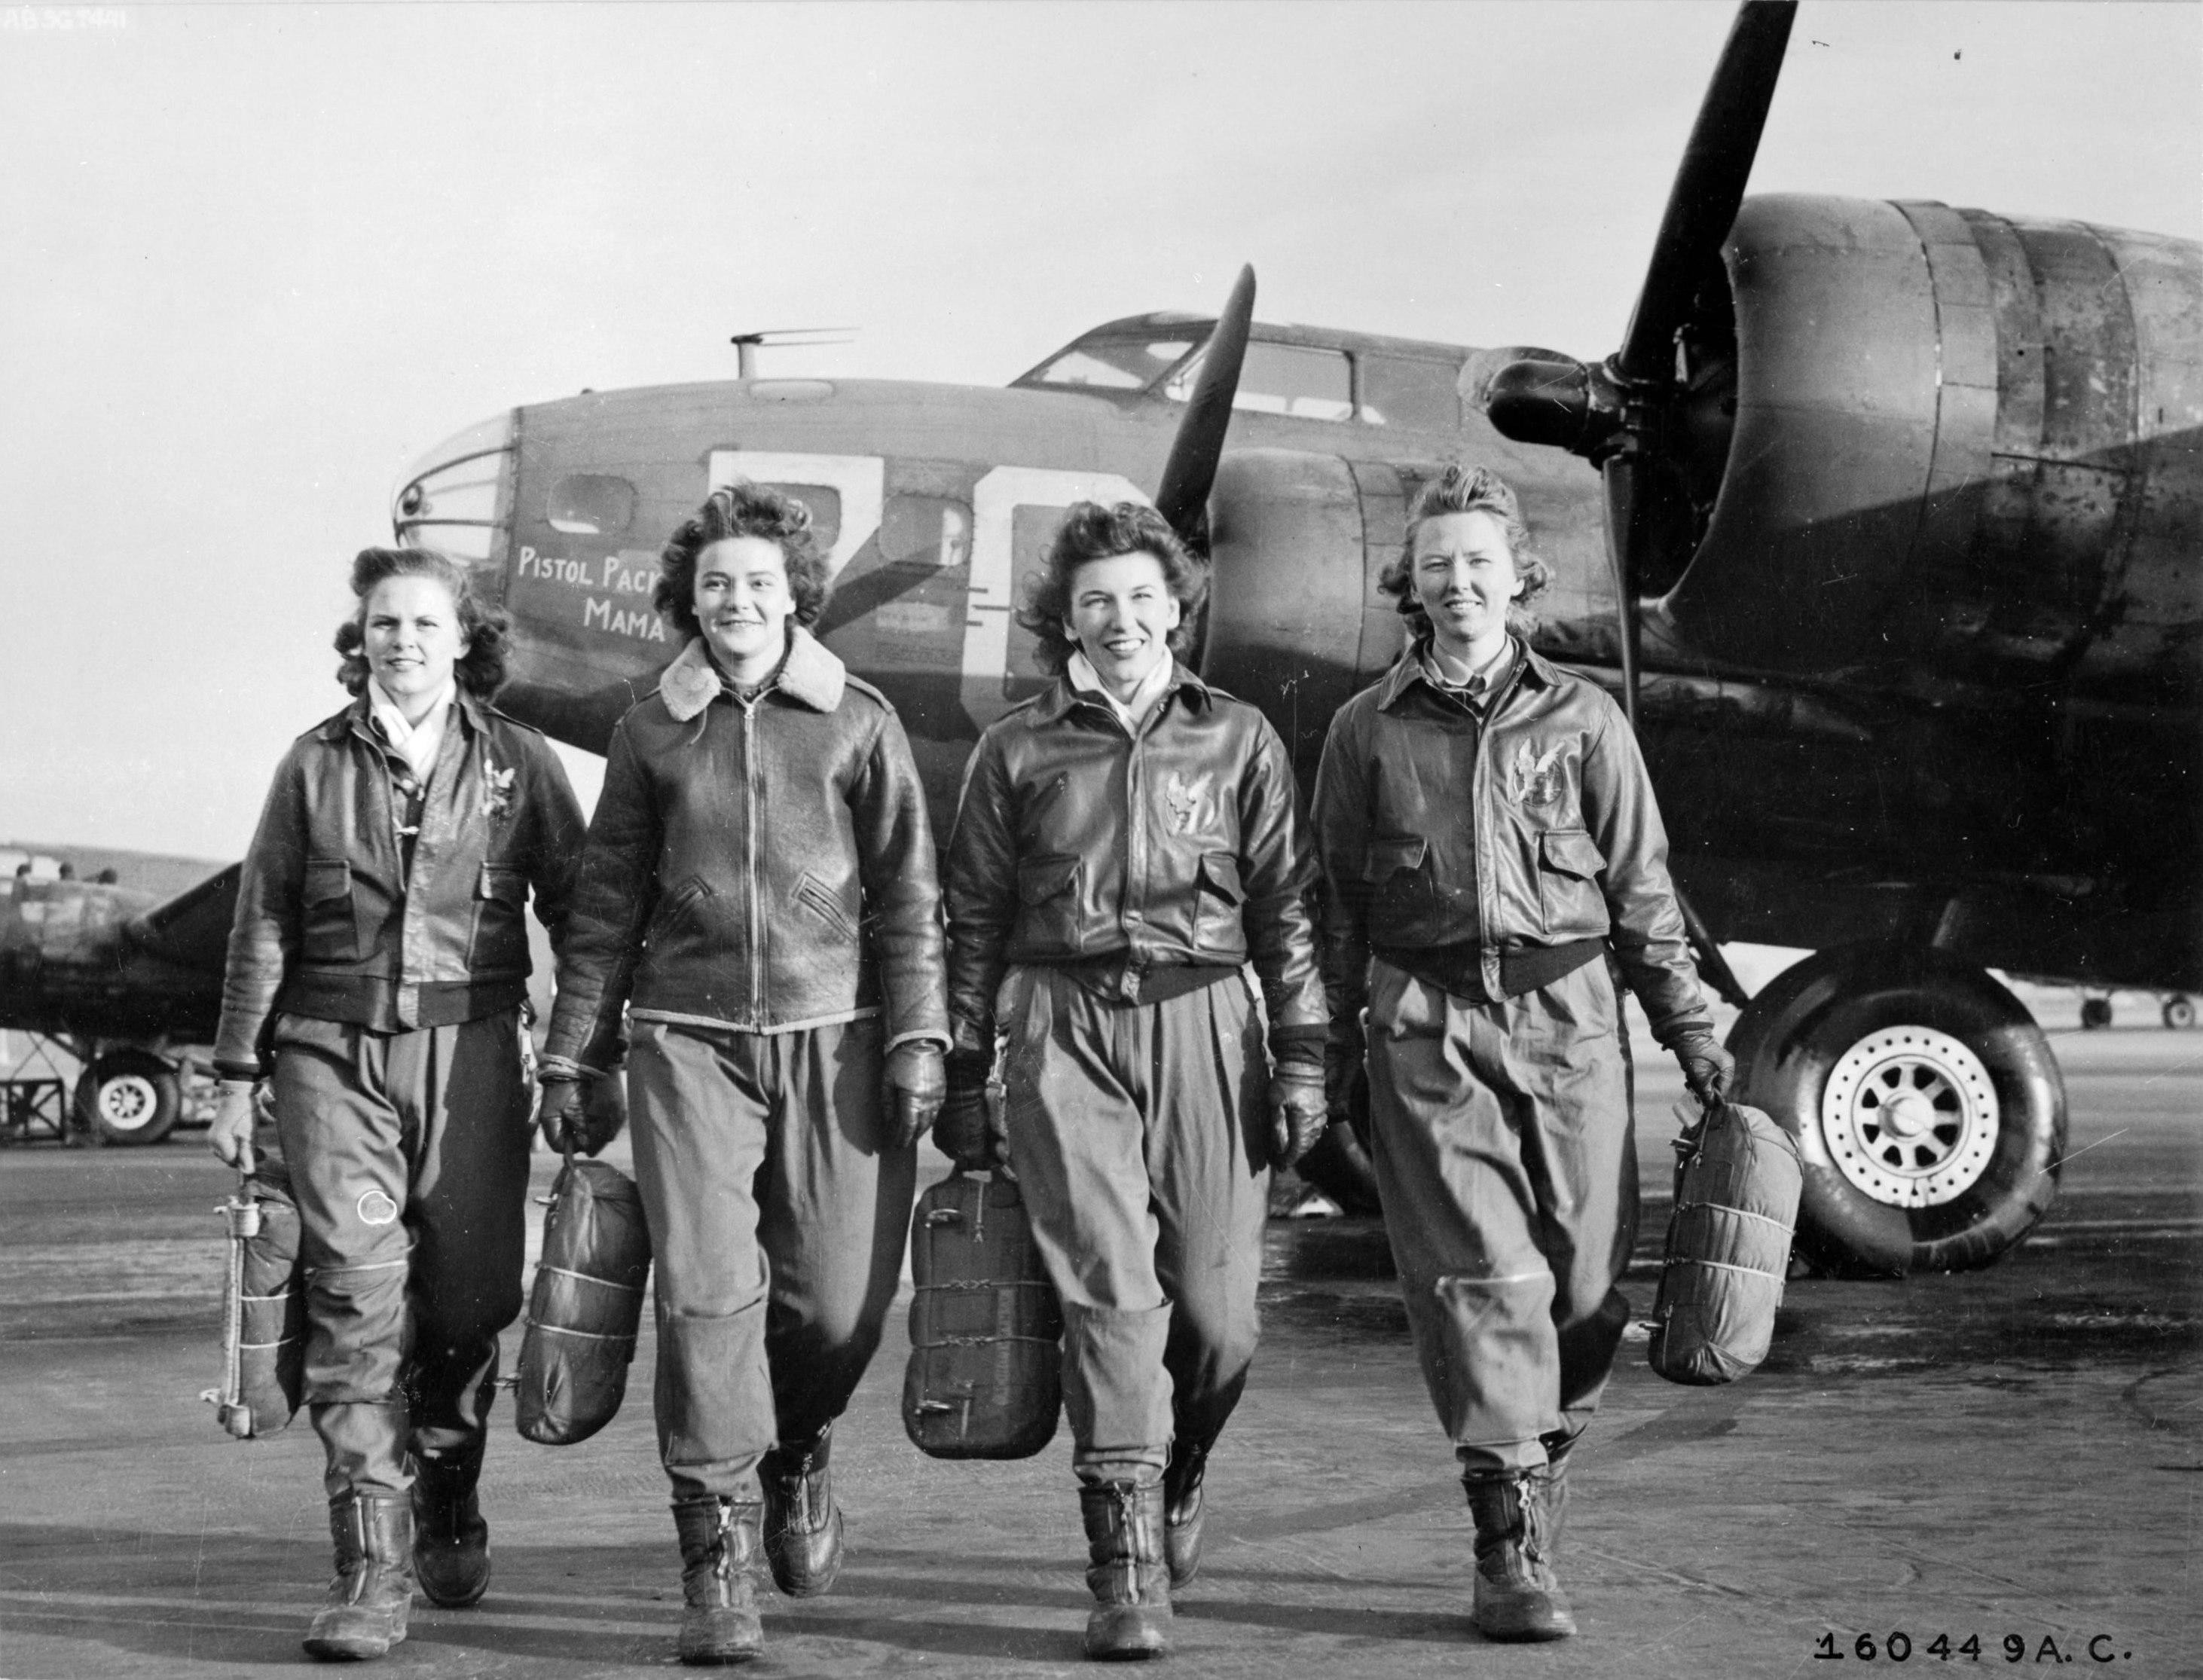 Four WASP pilots in training in front of B-17 bomber 'Pistol Packin' Mama', Lockbourne, Ohio, United States, circa 1943-1945